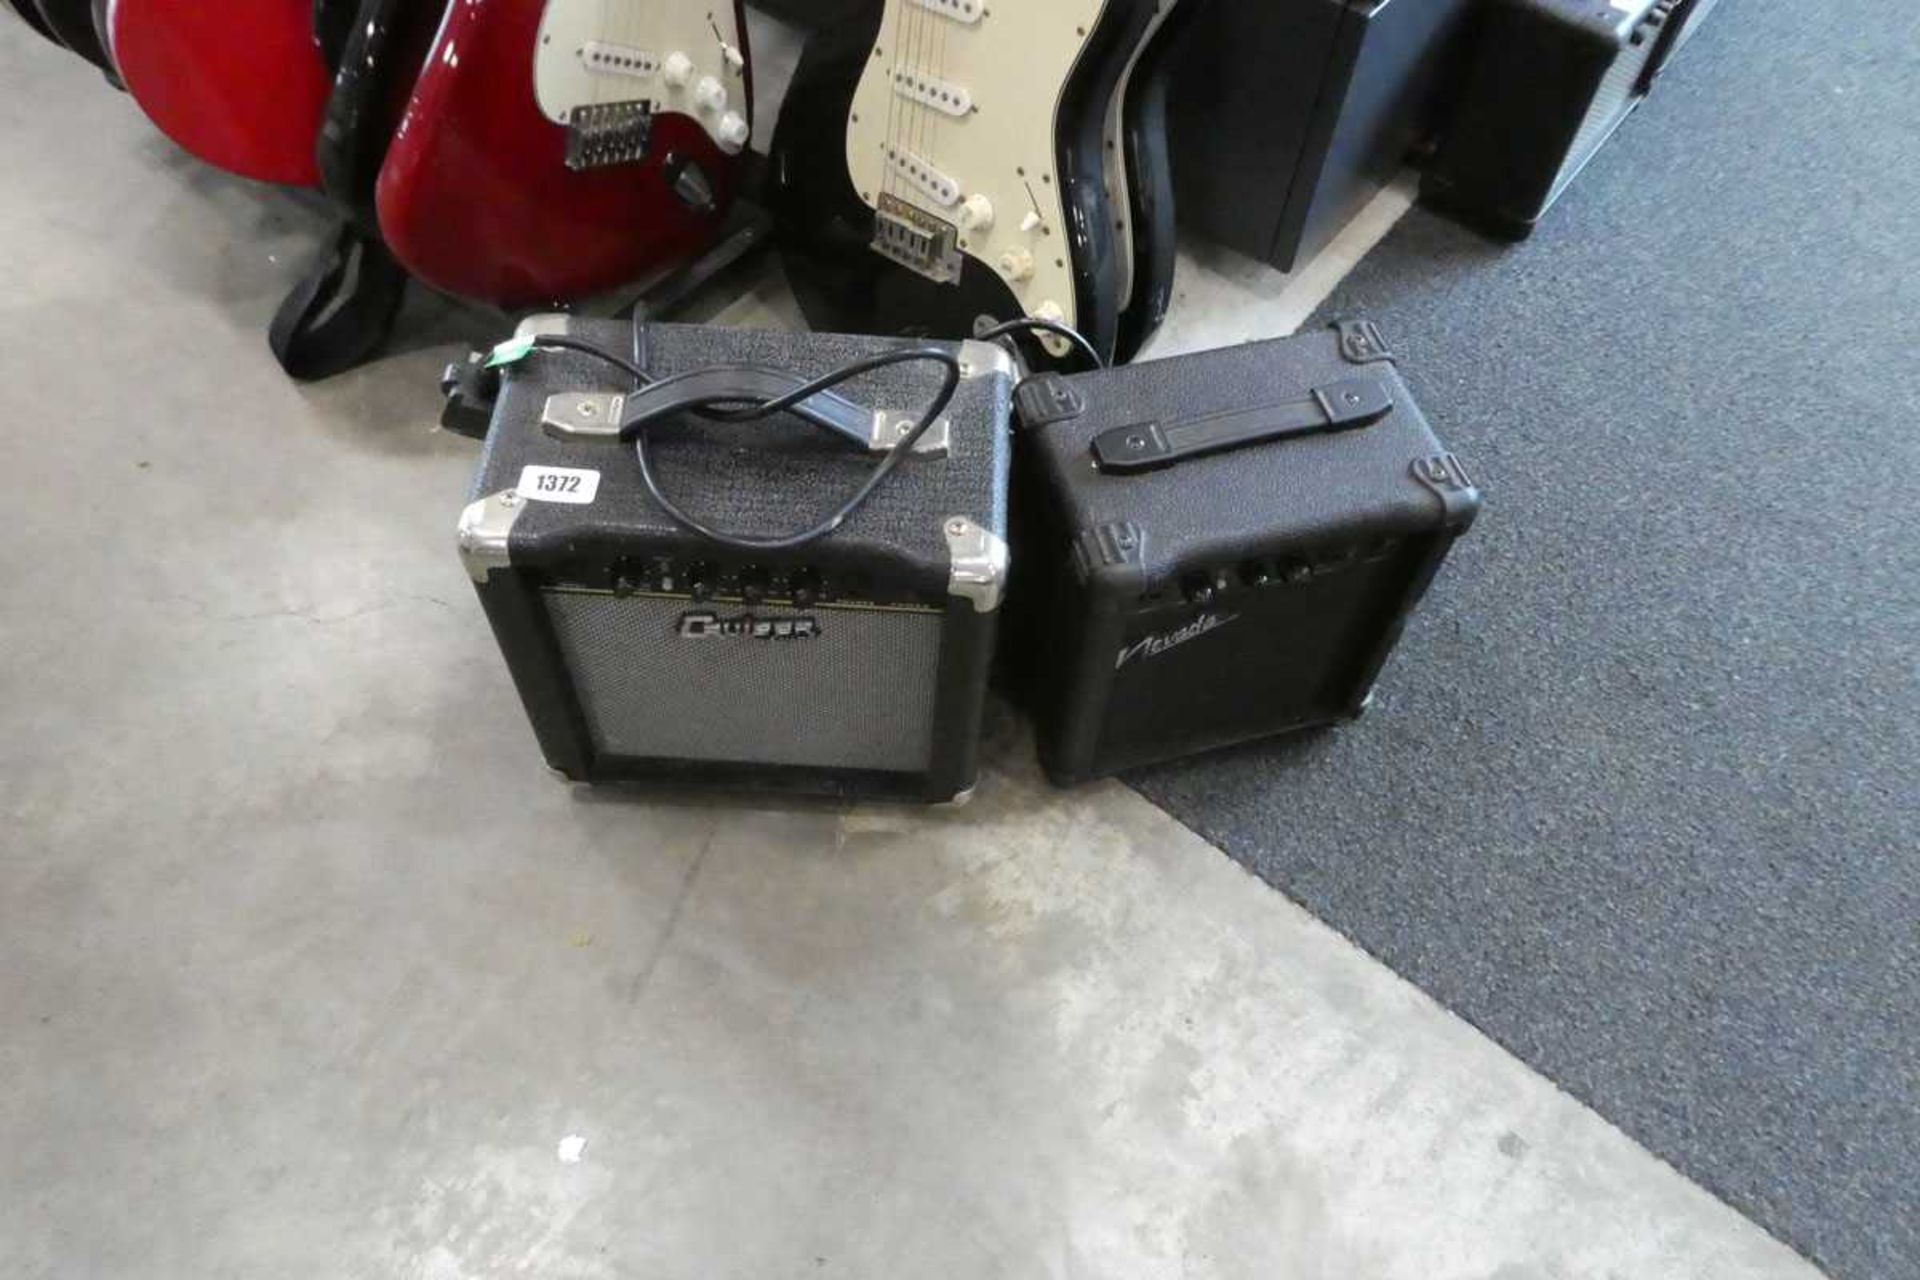 2 electric guitar amplifiers, 1 Cruiser by Crater and 1 Nevada